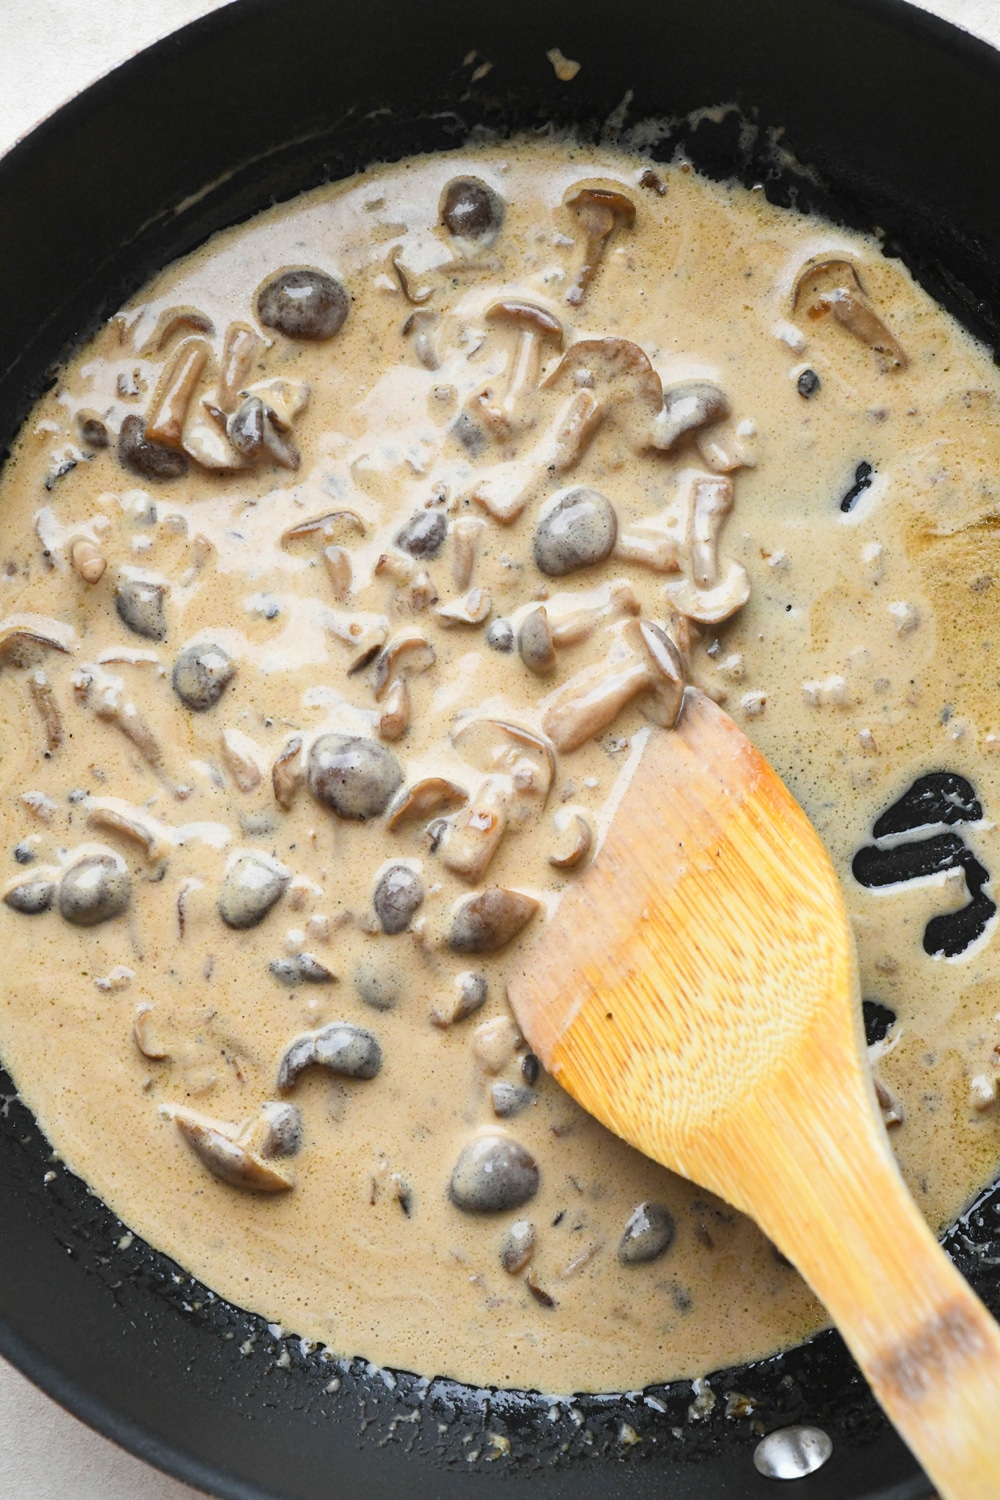 An example of how to use cashew cream in mushroom gravy.